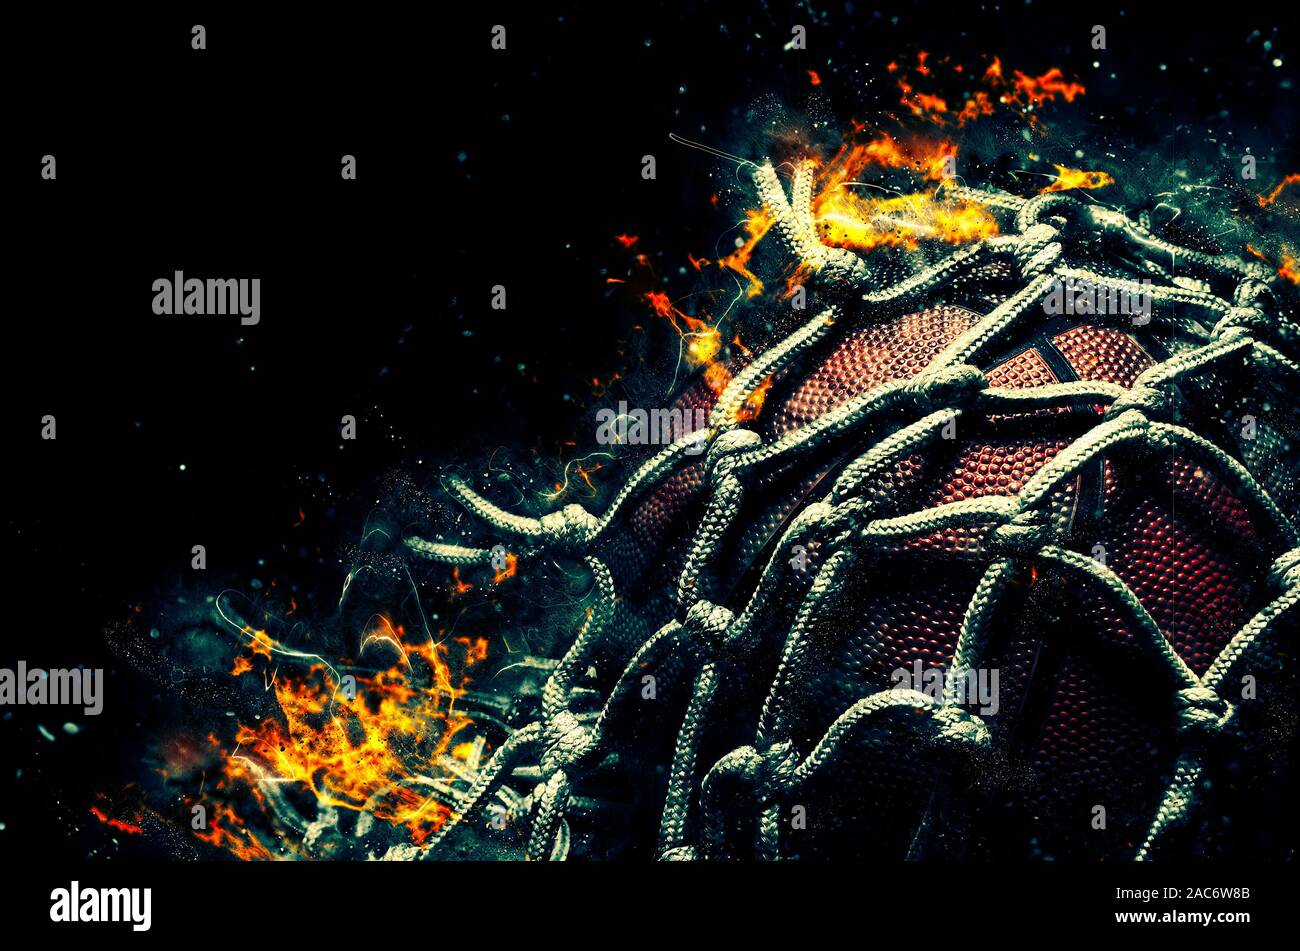 Basketball ball on black background with fire Stock Photo